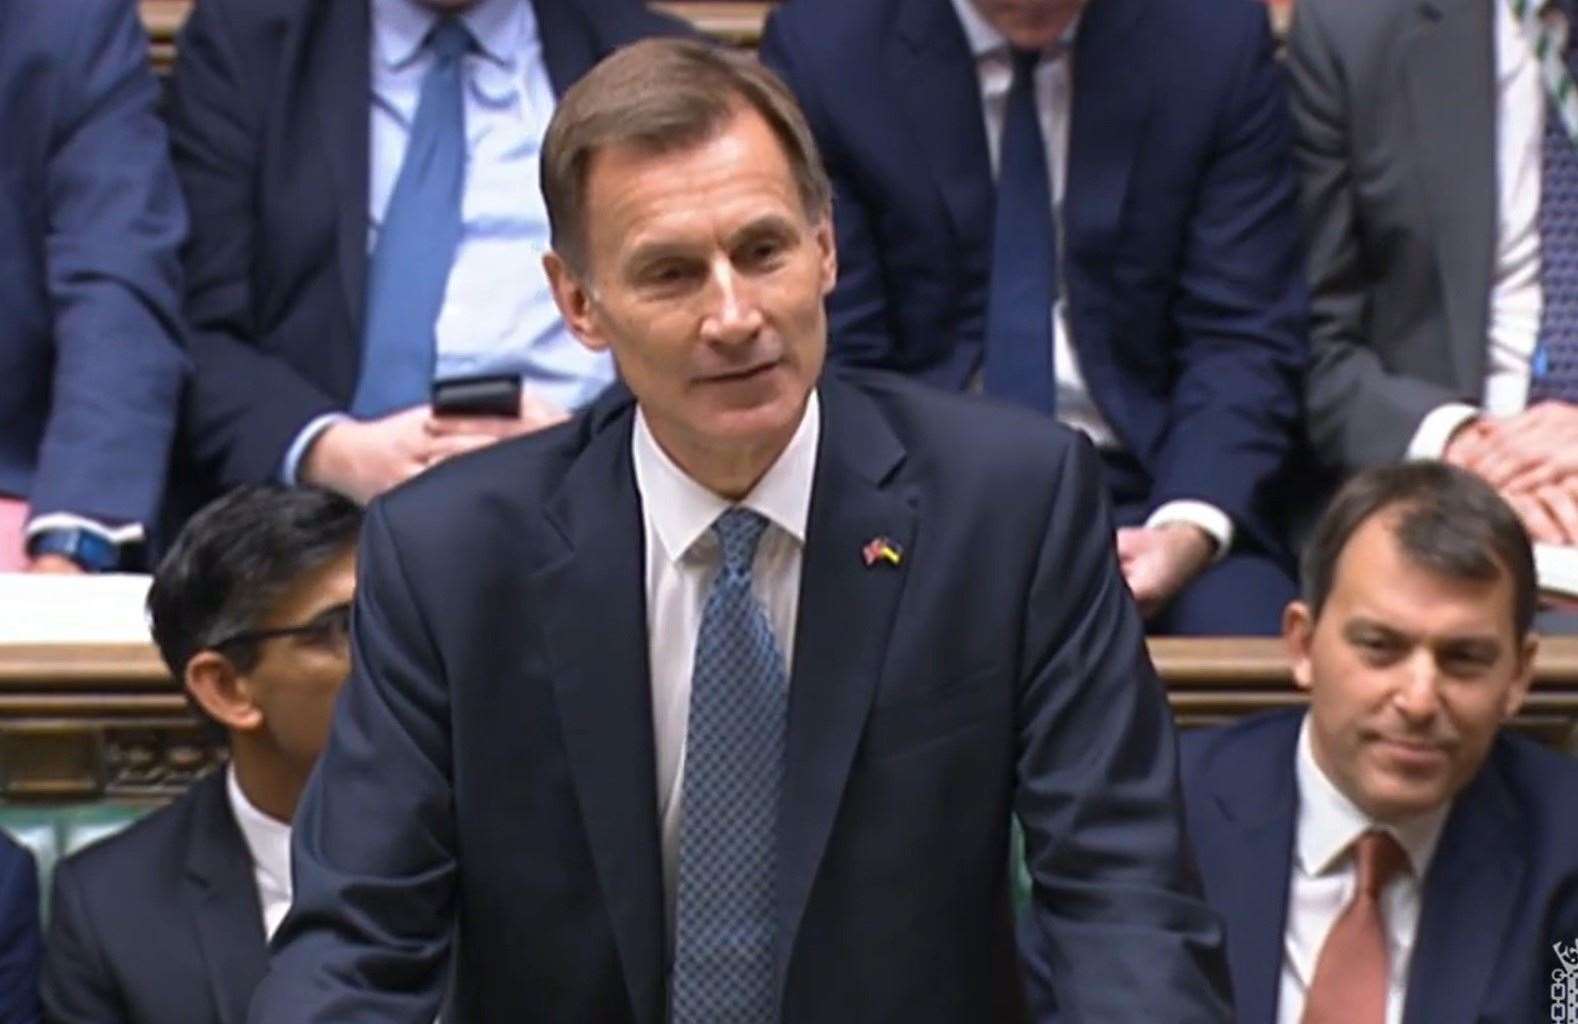 Chancellor of the Exchequer Jeremy Hunt is being asked to extend support for households